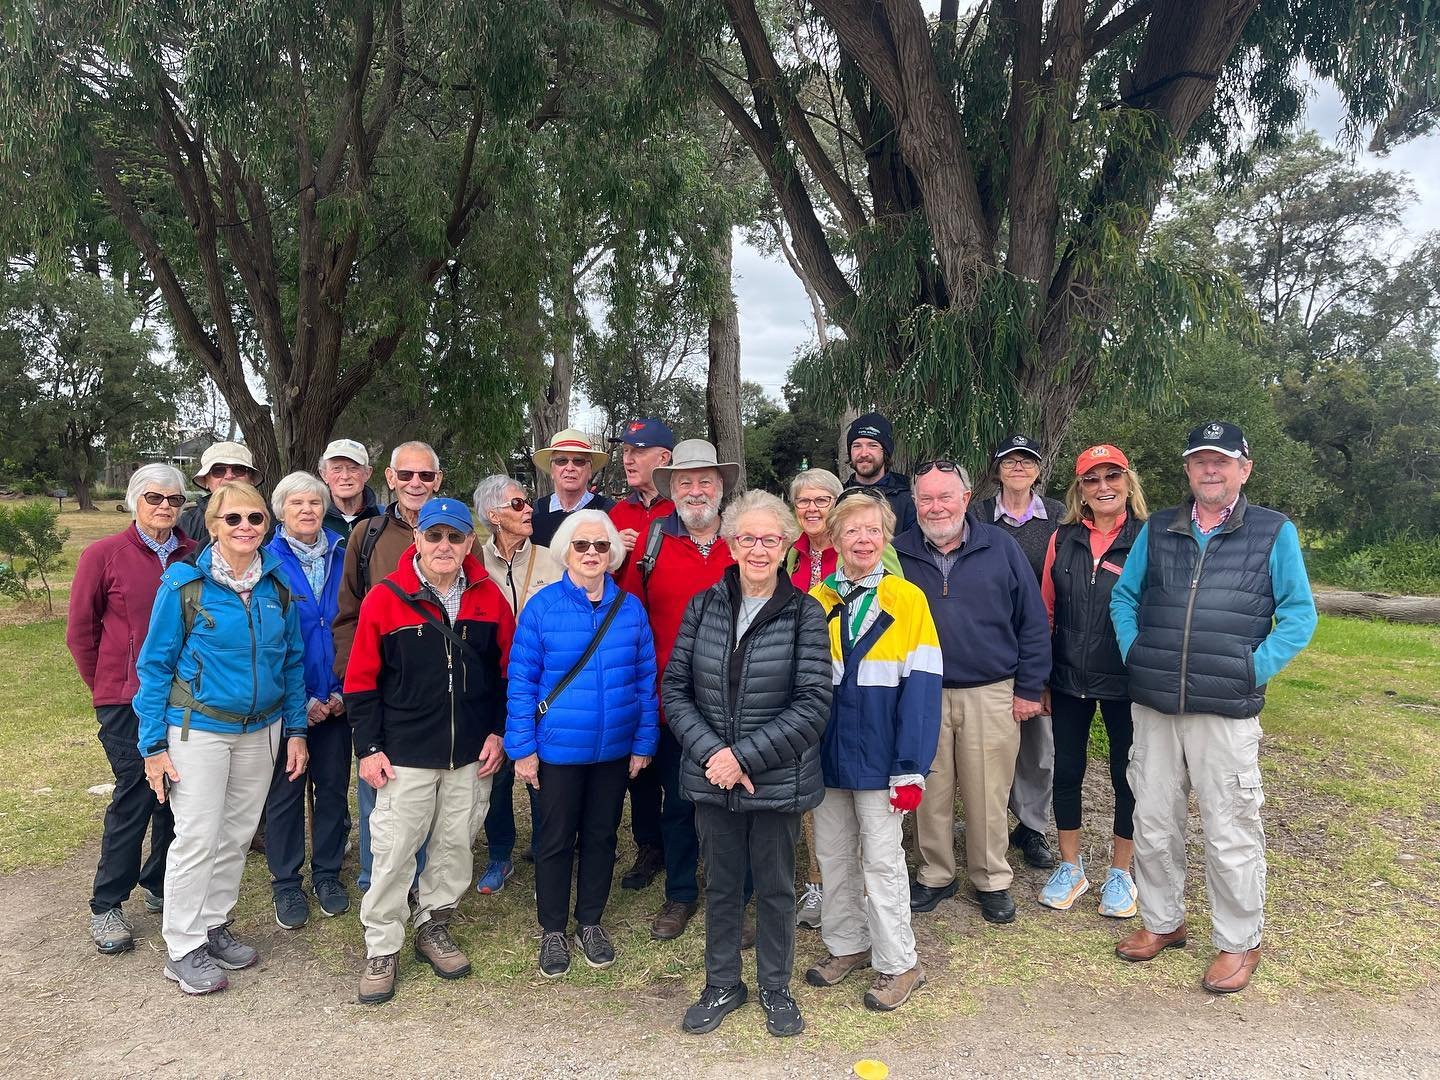 Earlier this month, Foreshore Rangers Kristy and Brendan were joined by The Old Scotch Bushwalking Club for a Bush &lsquo;Walk and Talk.&rsquo; 
We began our walk at Chinamans Creek, where the Club learned about our significant fauna. This included s